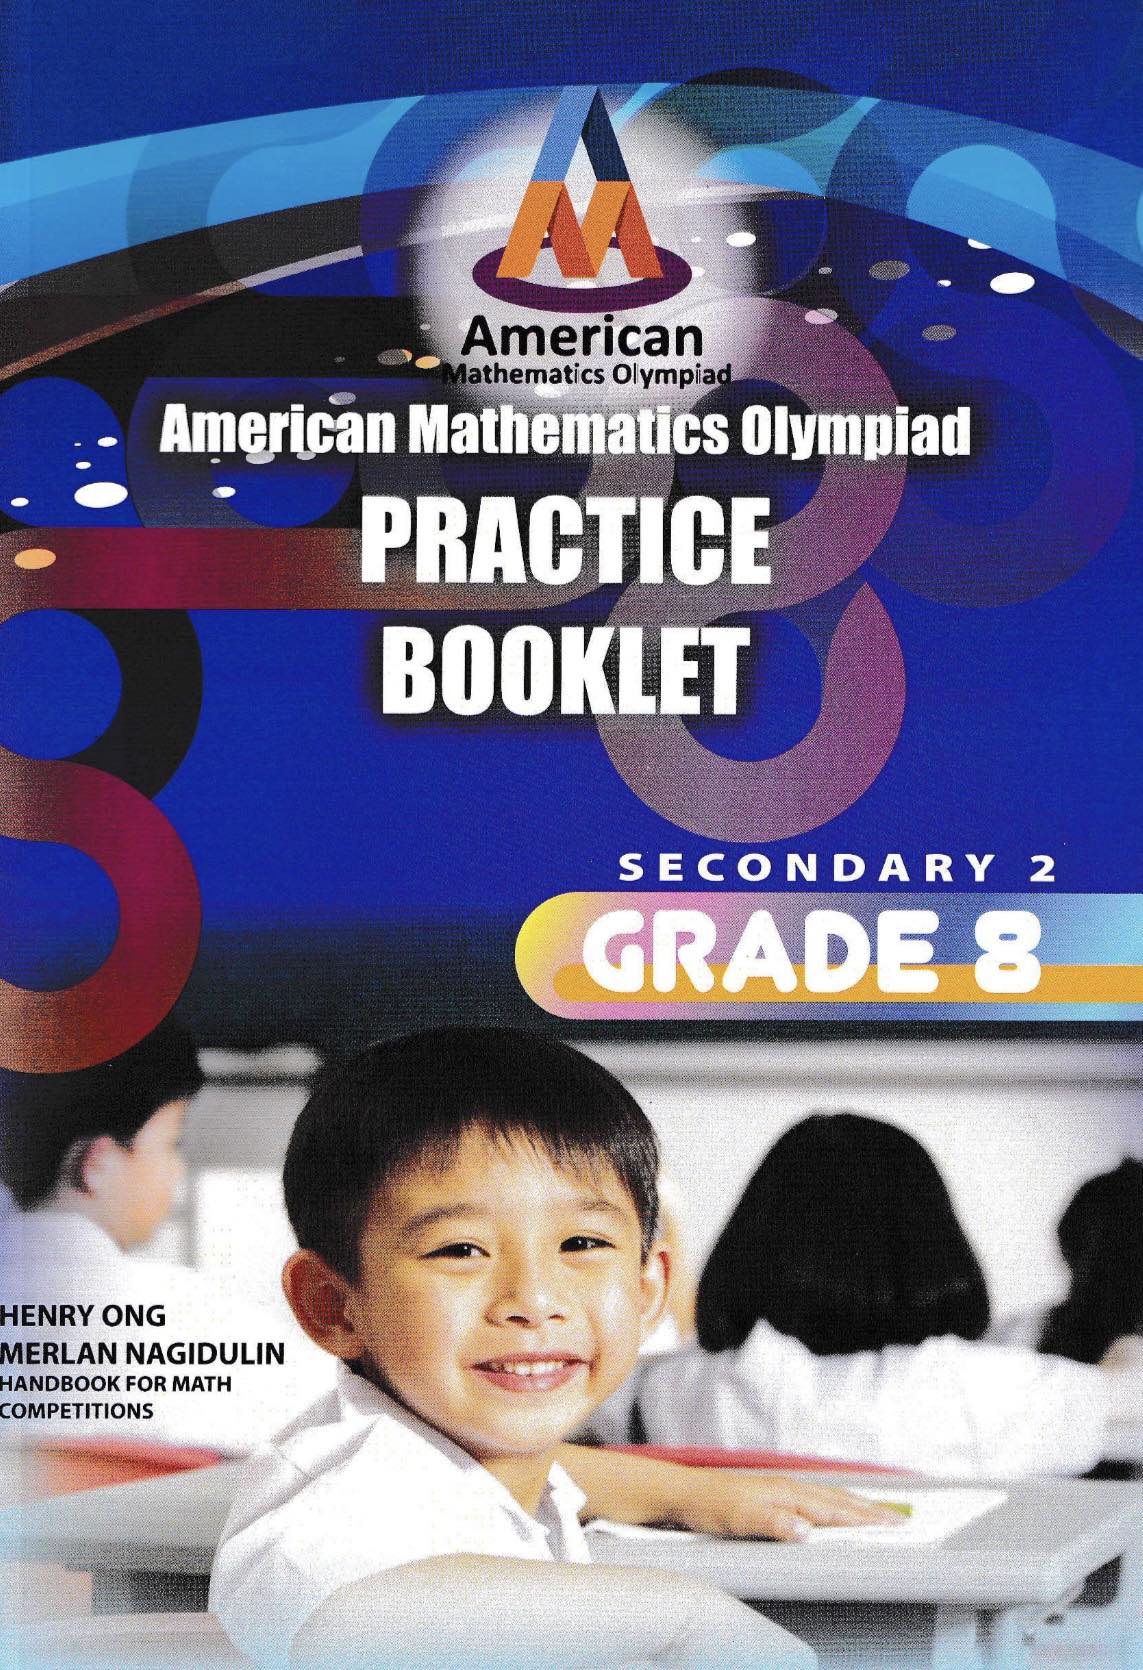 American Mathematics Olympiad (AMO) Practice Booklet for New Syllabus